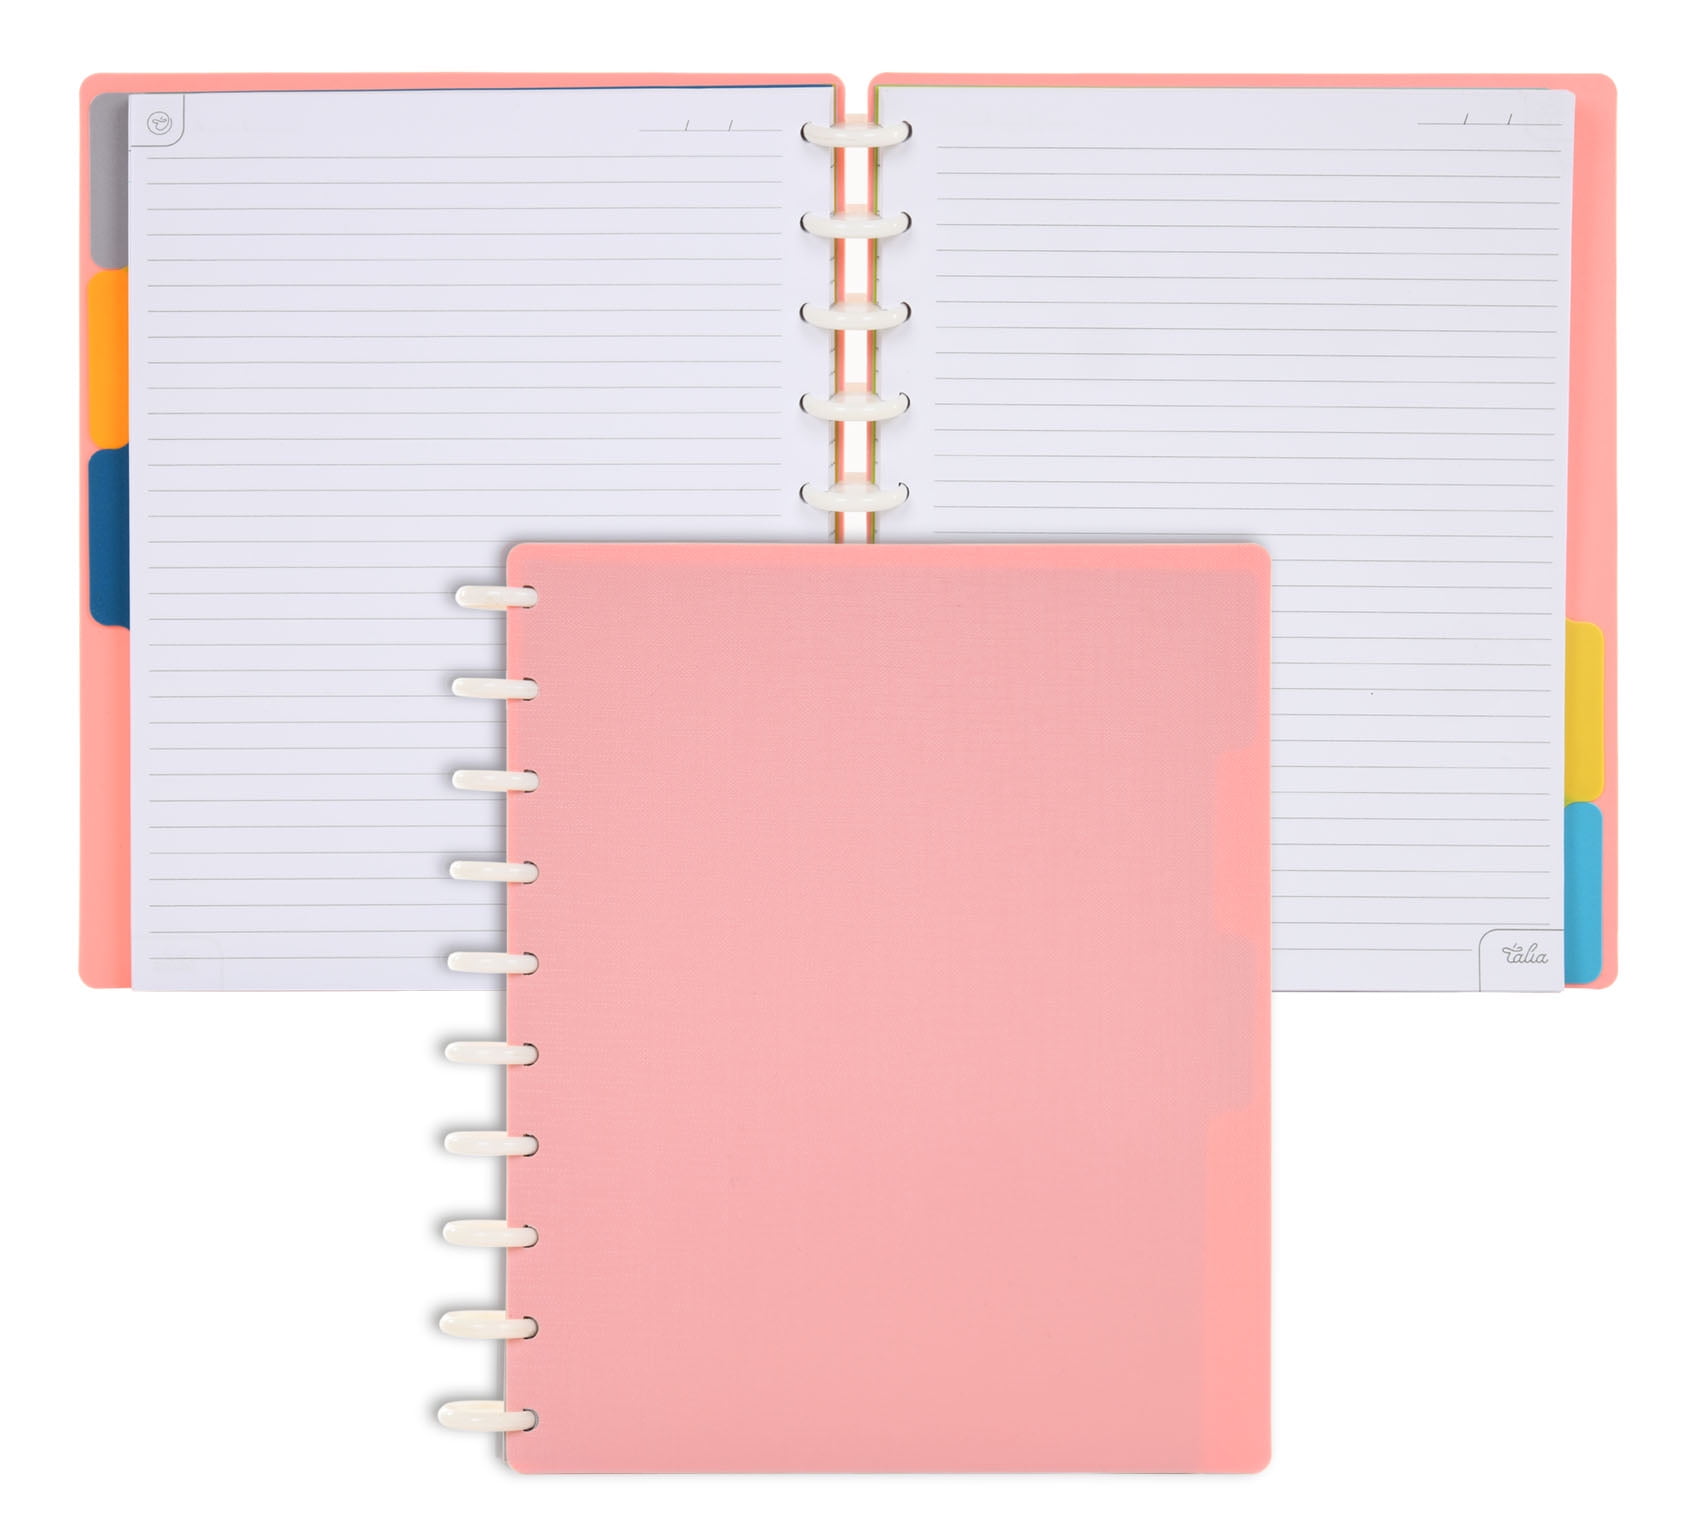 Discbound Planning Notebooks & Systems — Plan With Laur